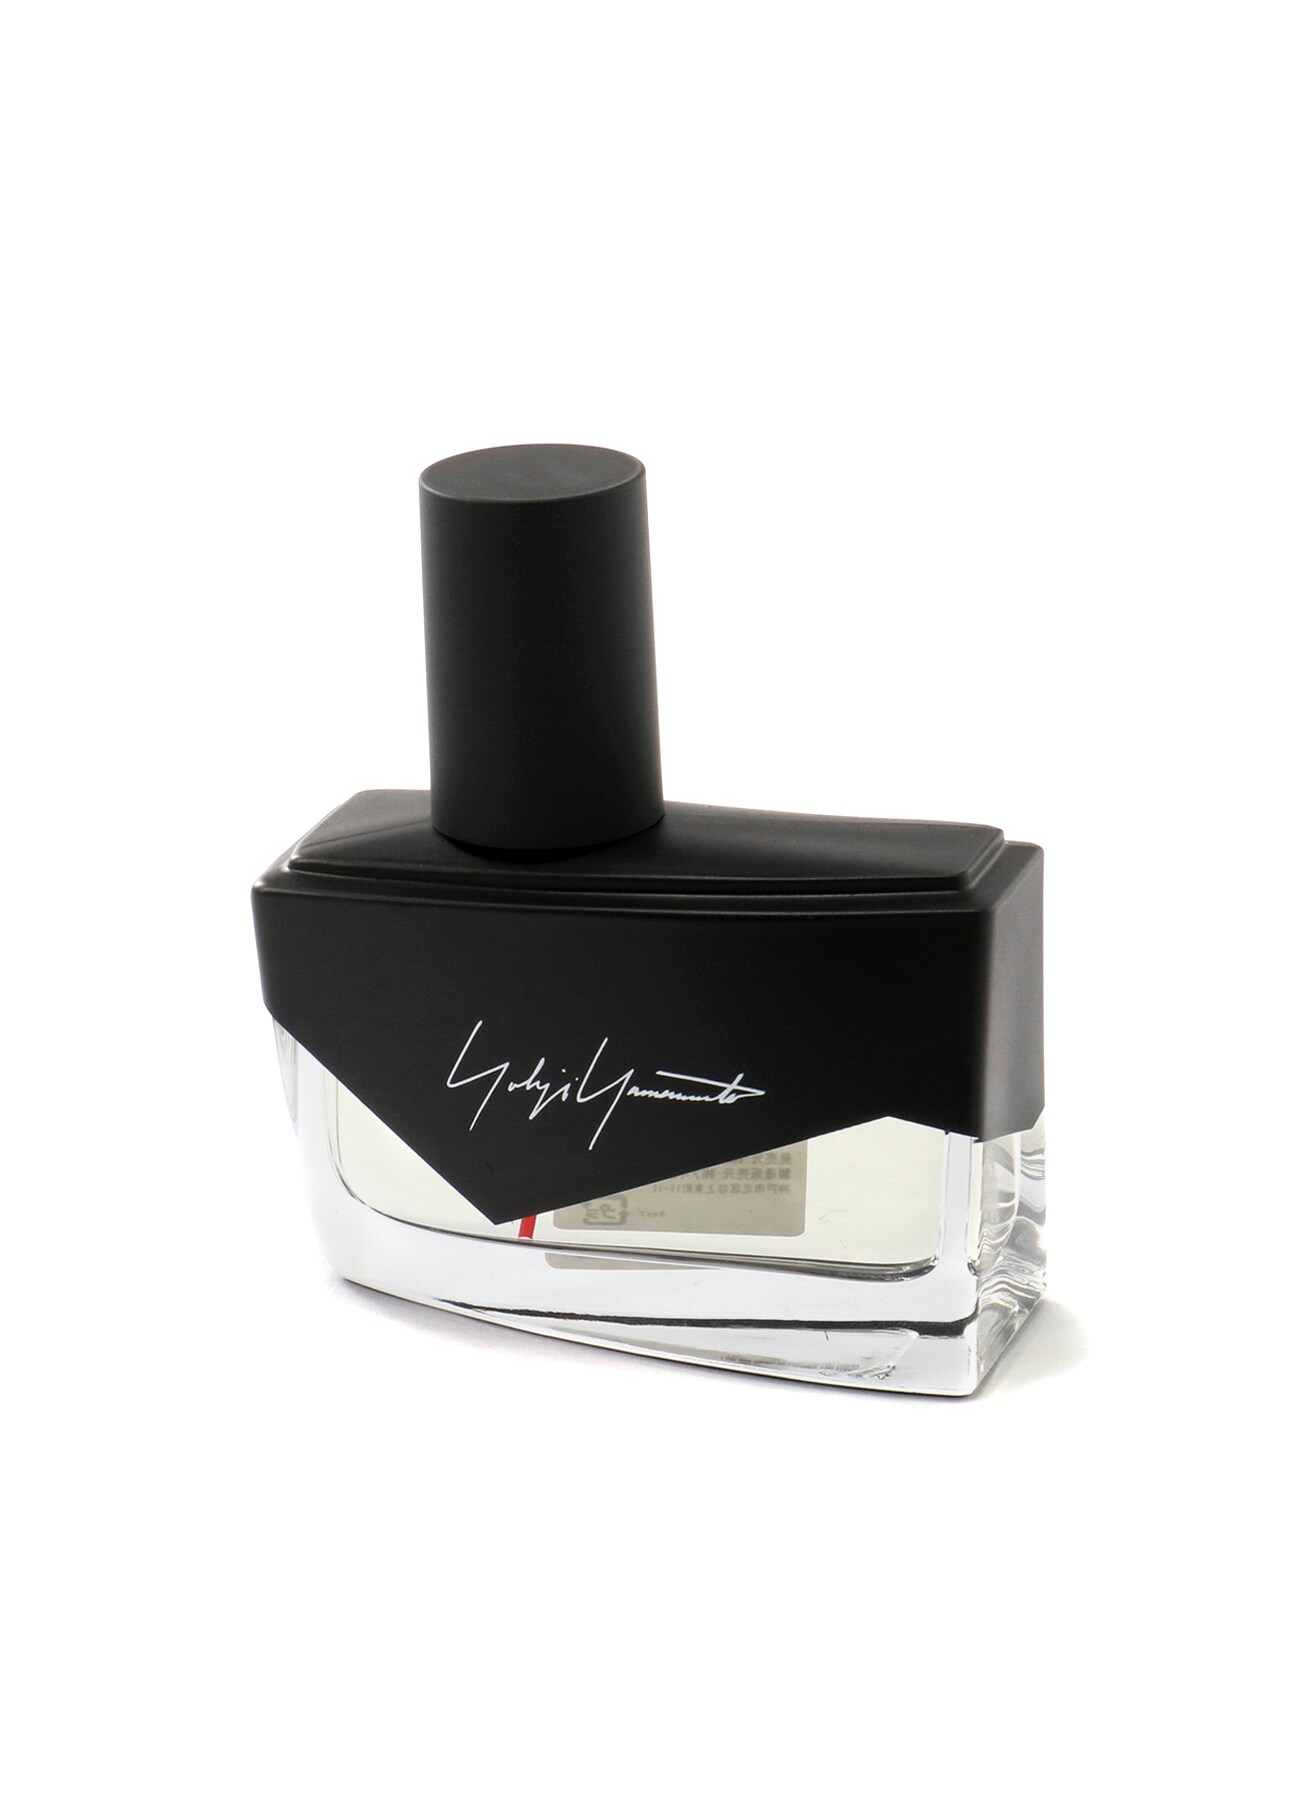 I AM NOT GOING TO DISTURB YOU FEMME 50ml